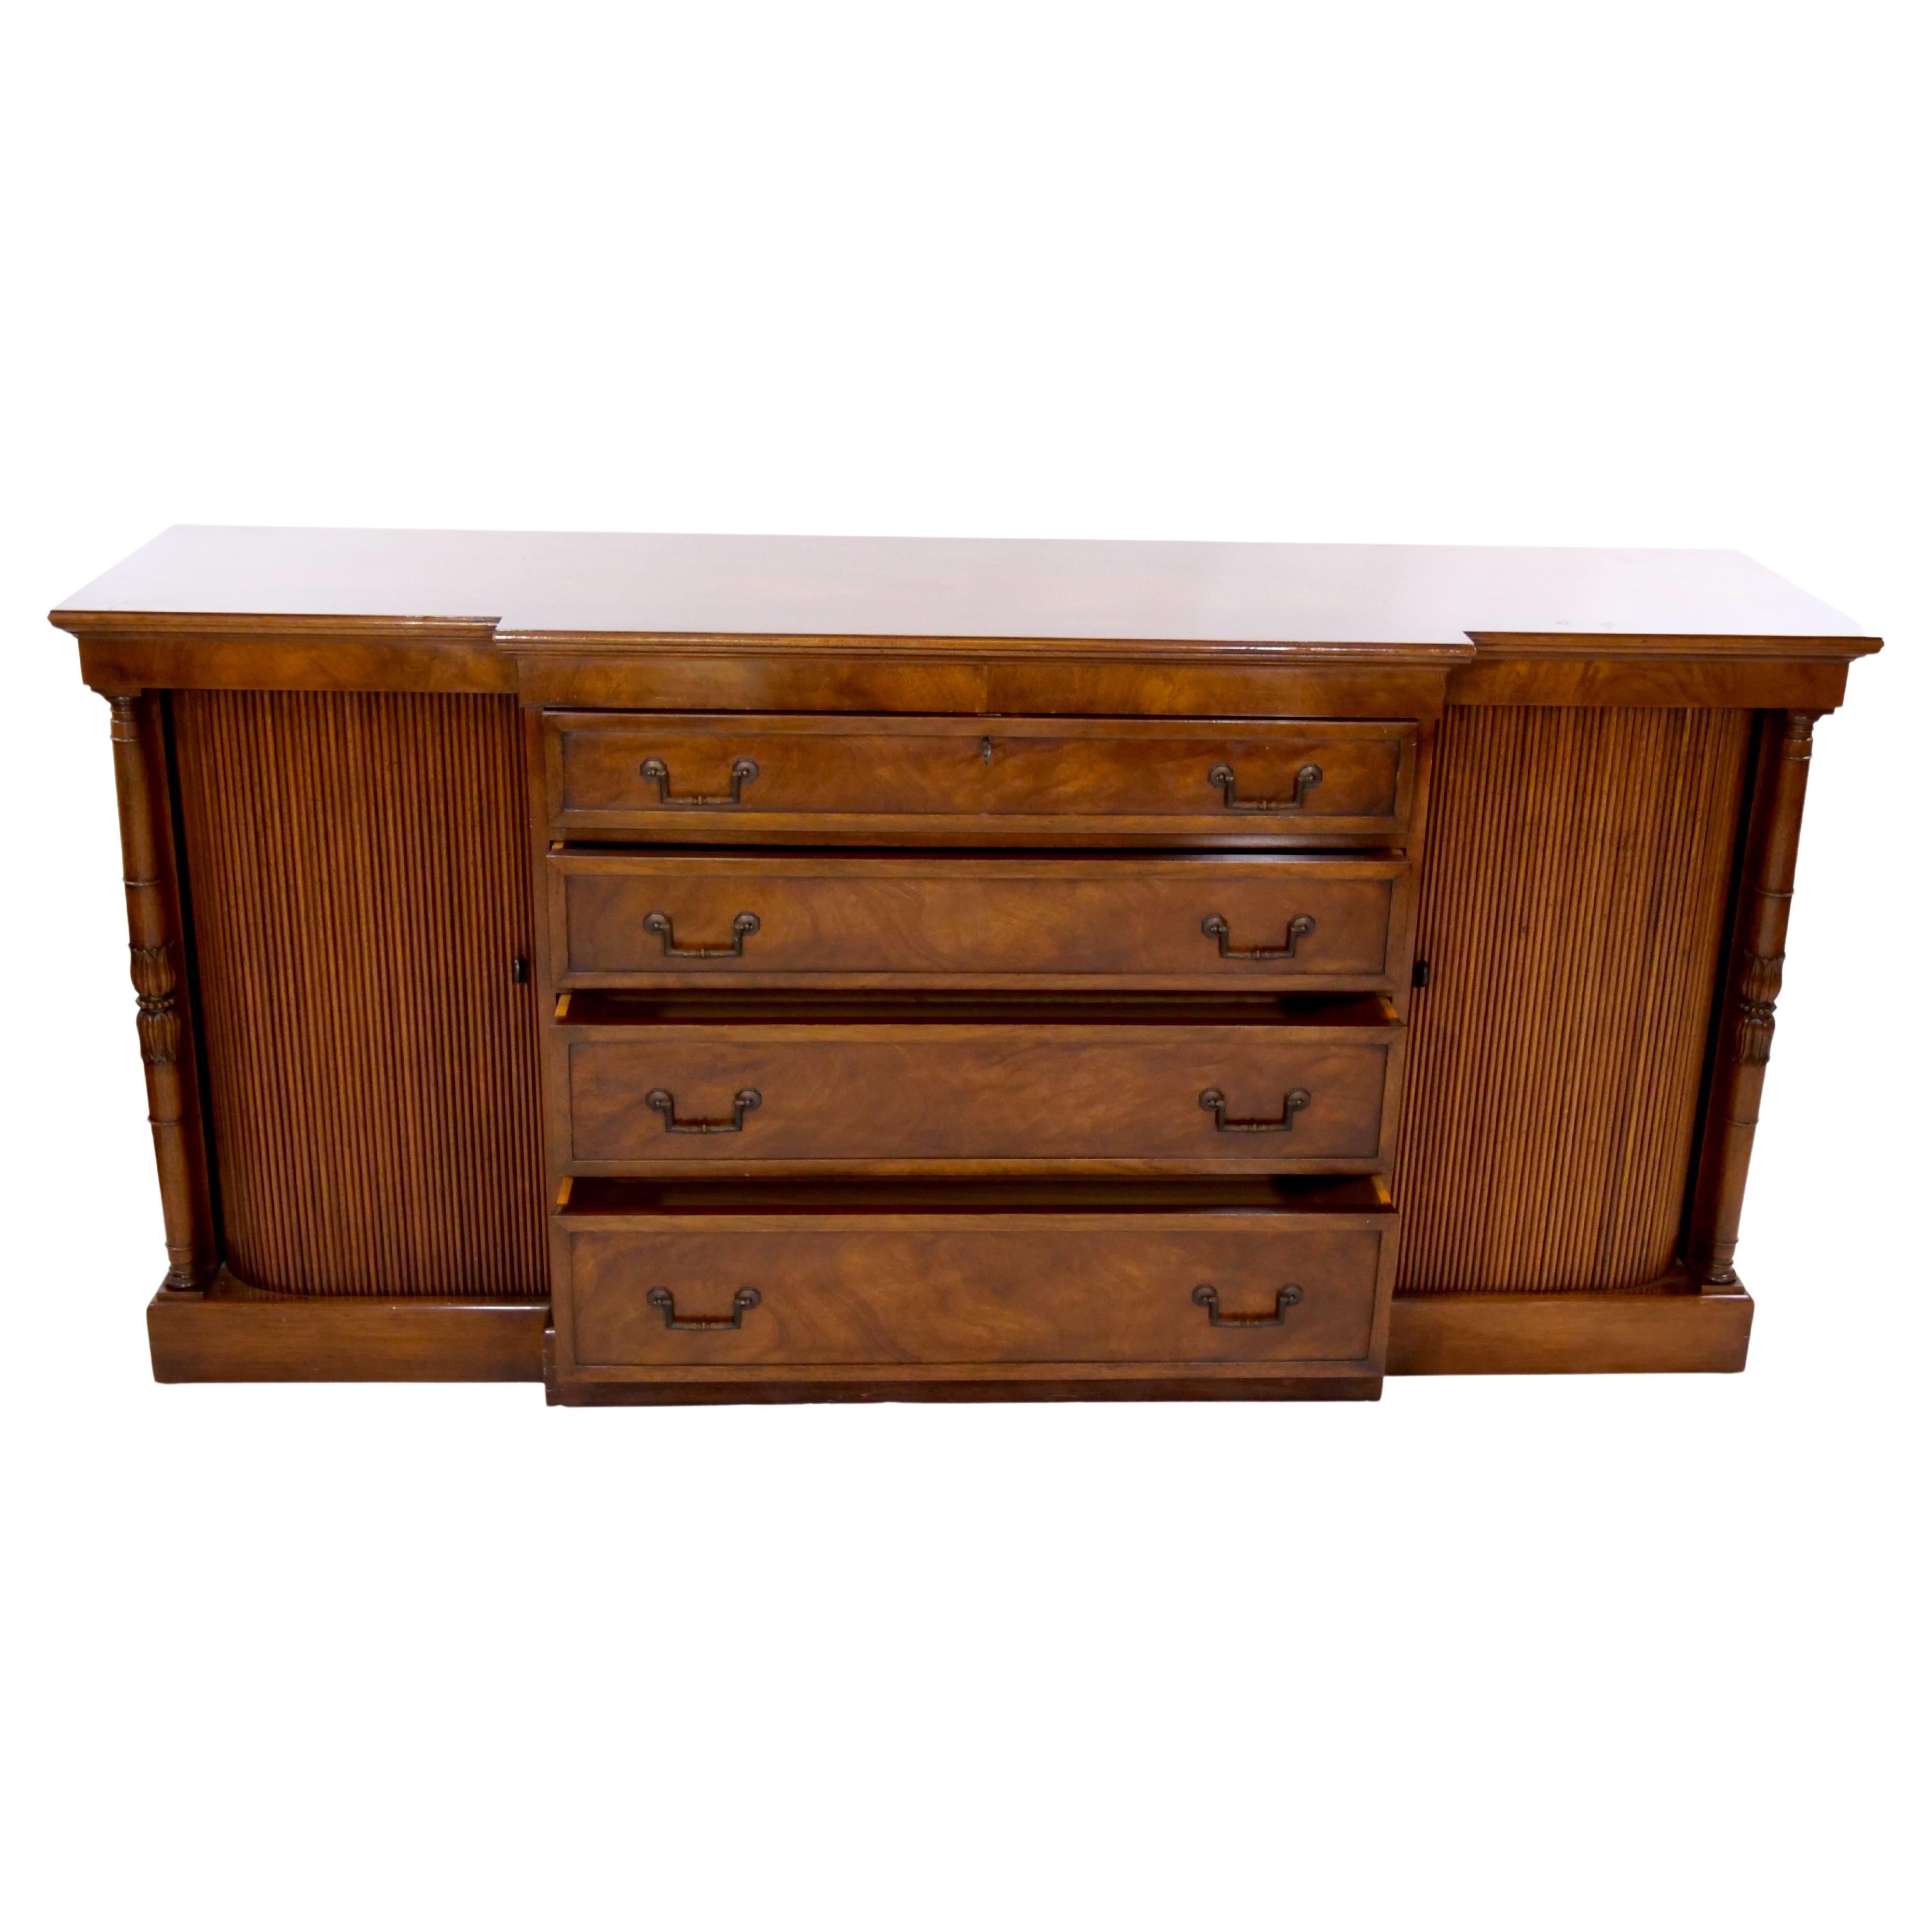 Beautifully hand crafted mahogany wood sideboard / credenza with two side doors and four pull front drawer with brass detail and key. The sideboard is very handsome and beautifully hand  crafted. The sideboard is in great condition. Minor wear